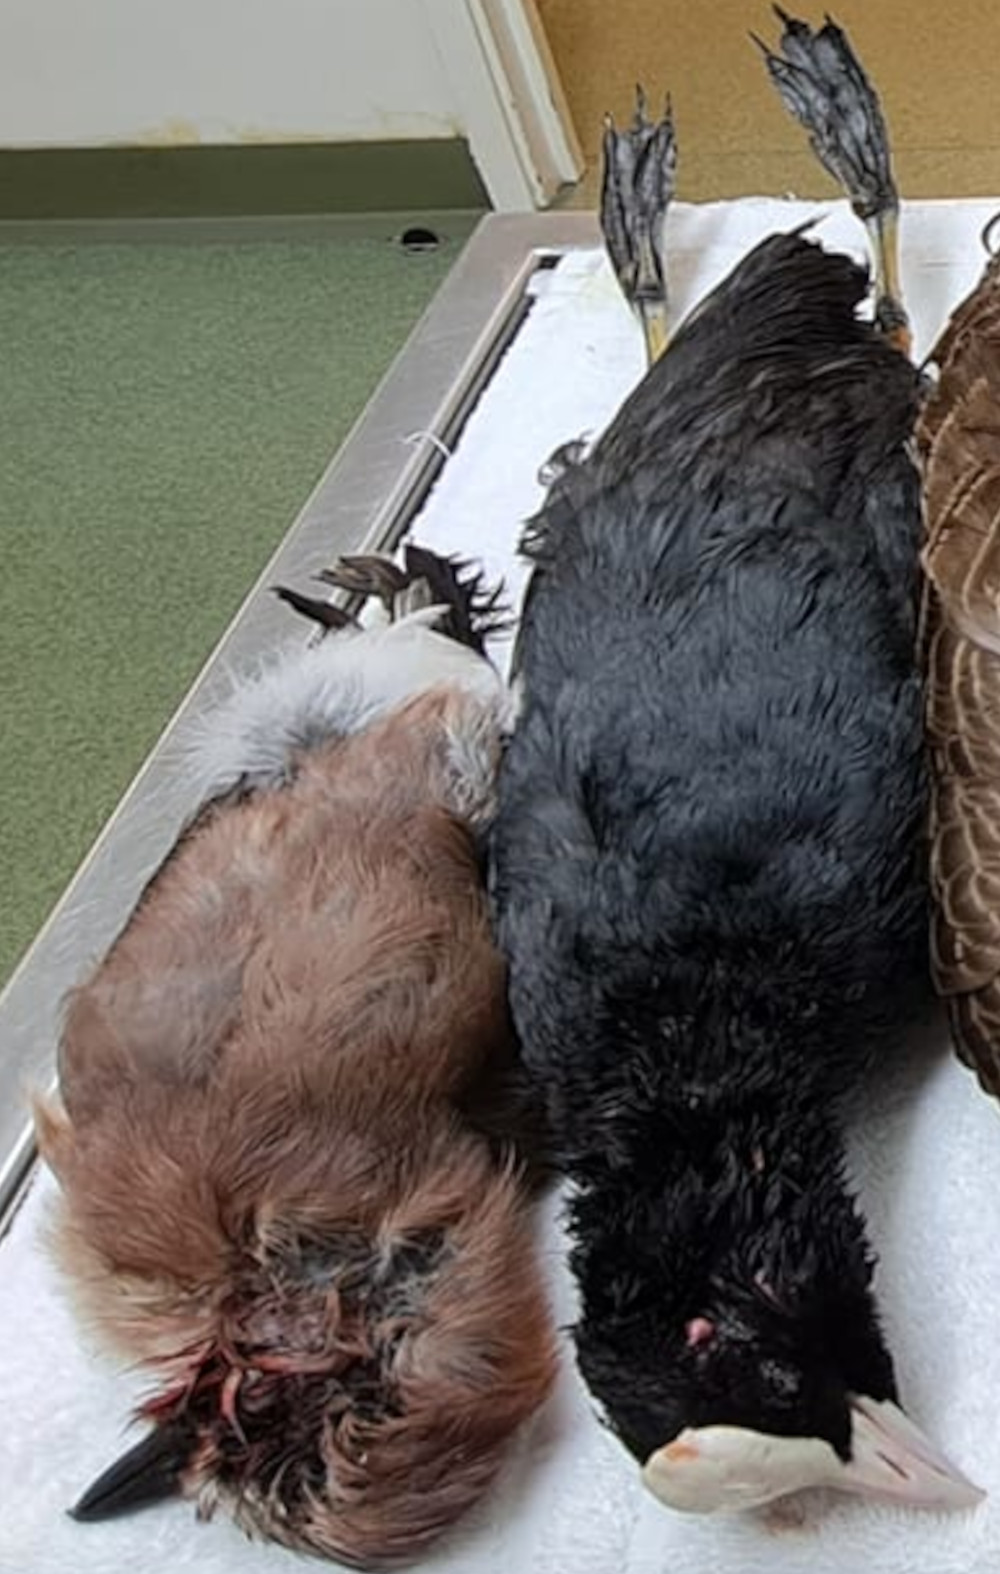 A dead Jay and Coot killed by thugs - Animal News UK